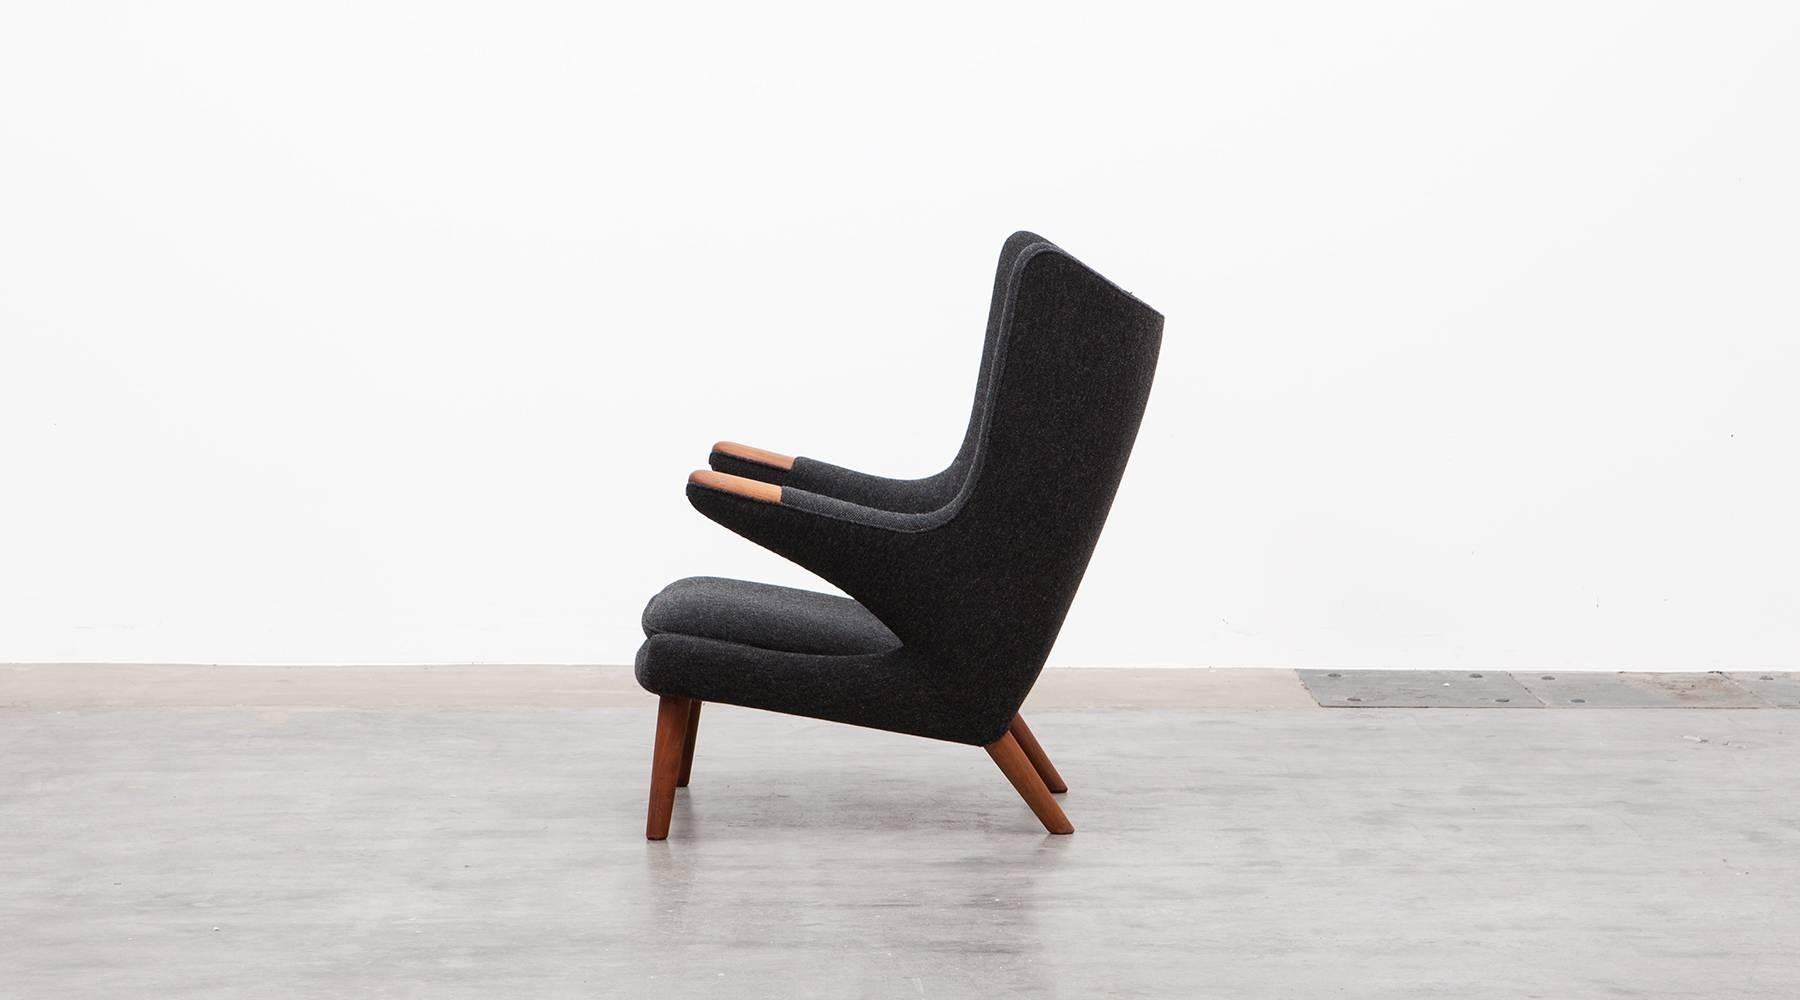 Wonderful original Papa Bear lounge chair designed by Hans Wegner. It is in perfect condition although the wood is reworked. It comes in a high-quality dark grey woolen fabric and is recently upholstered. The legs and nails are teak. Manufactured by